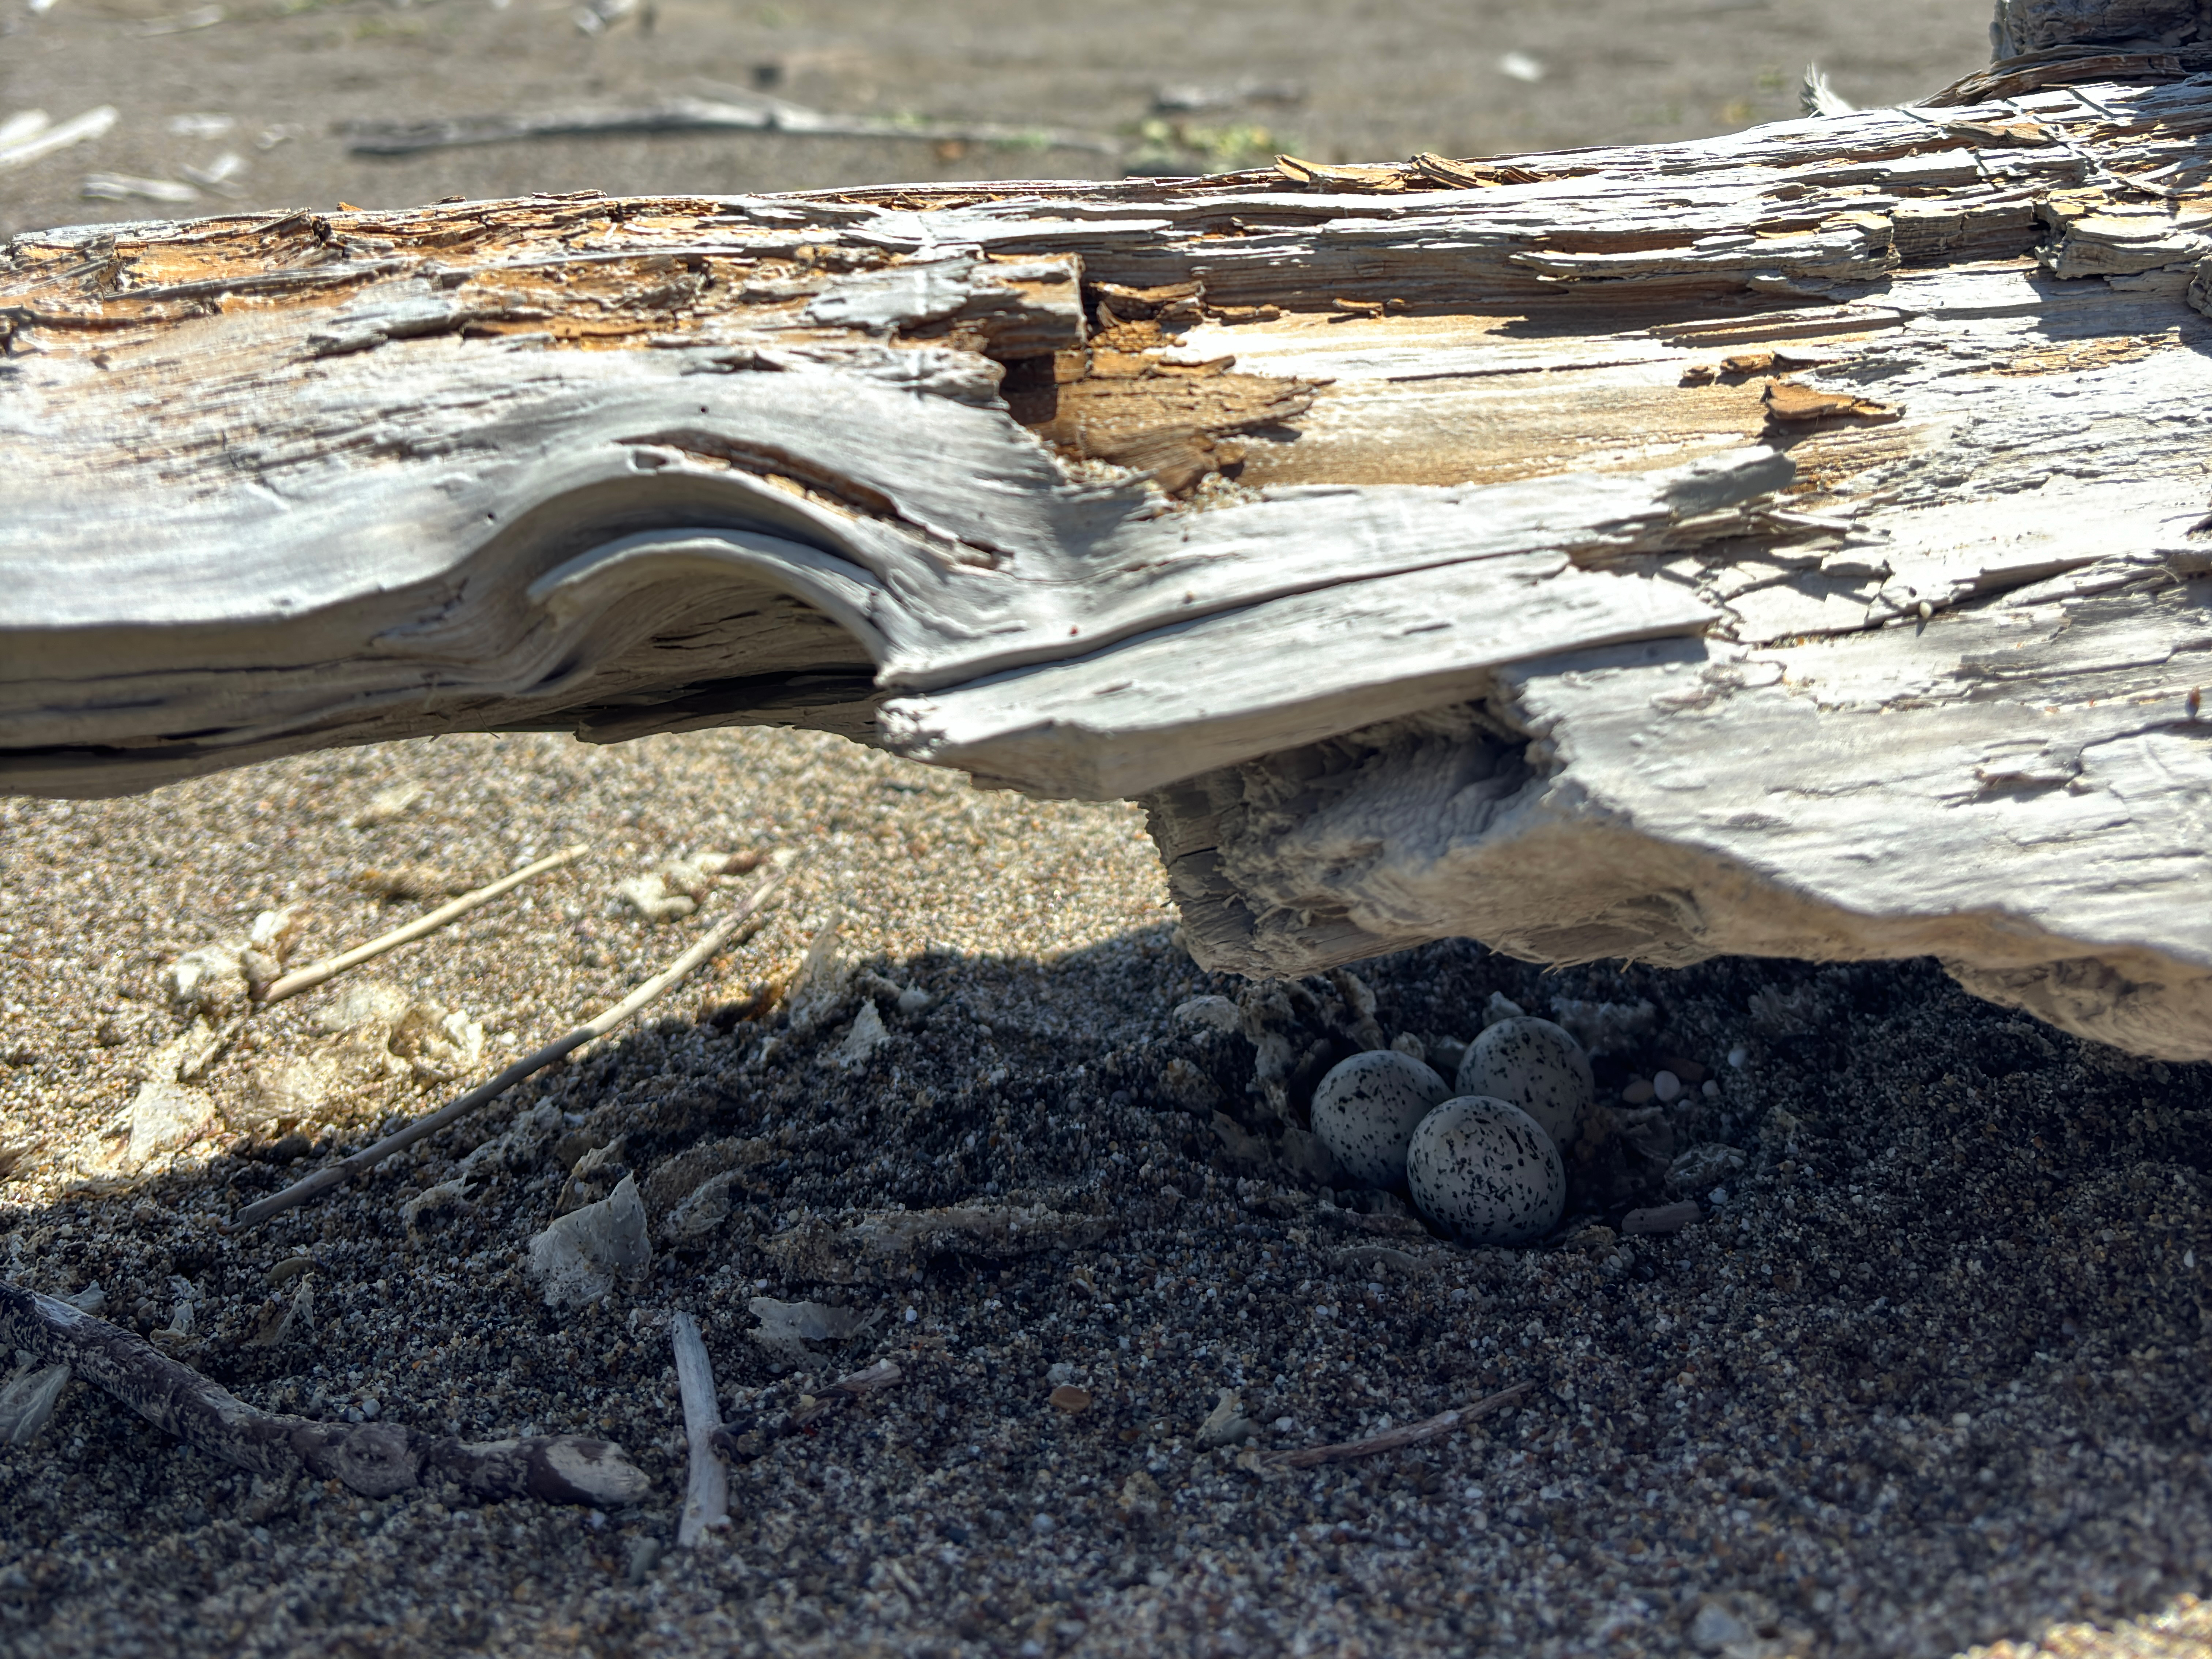 A close-up photo of three small black-speckled, beige-colored egg sitting on sand under a piece of driftwood that's elevated above the sand.